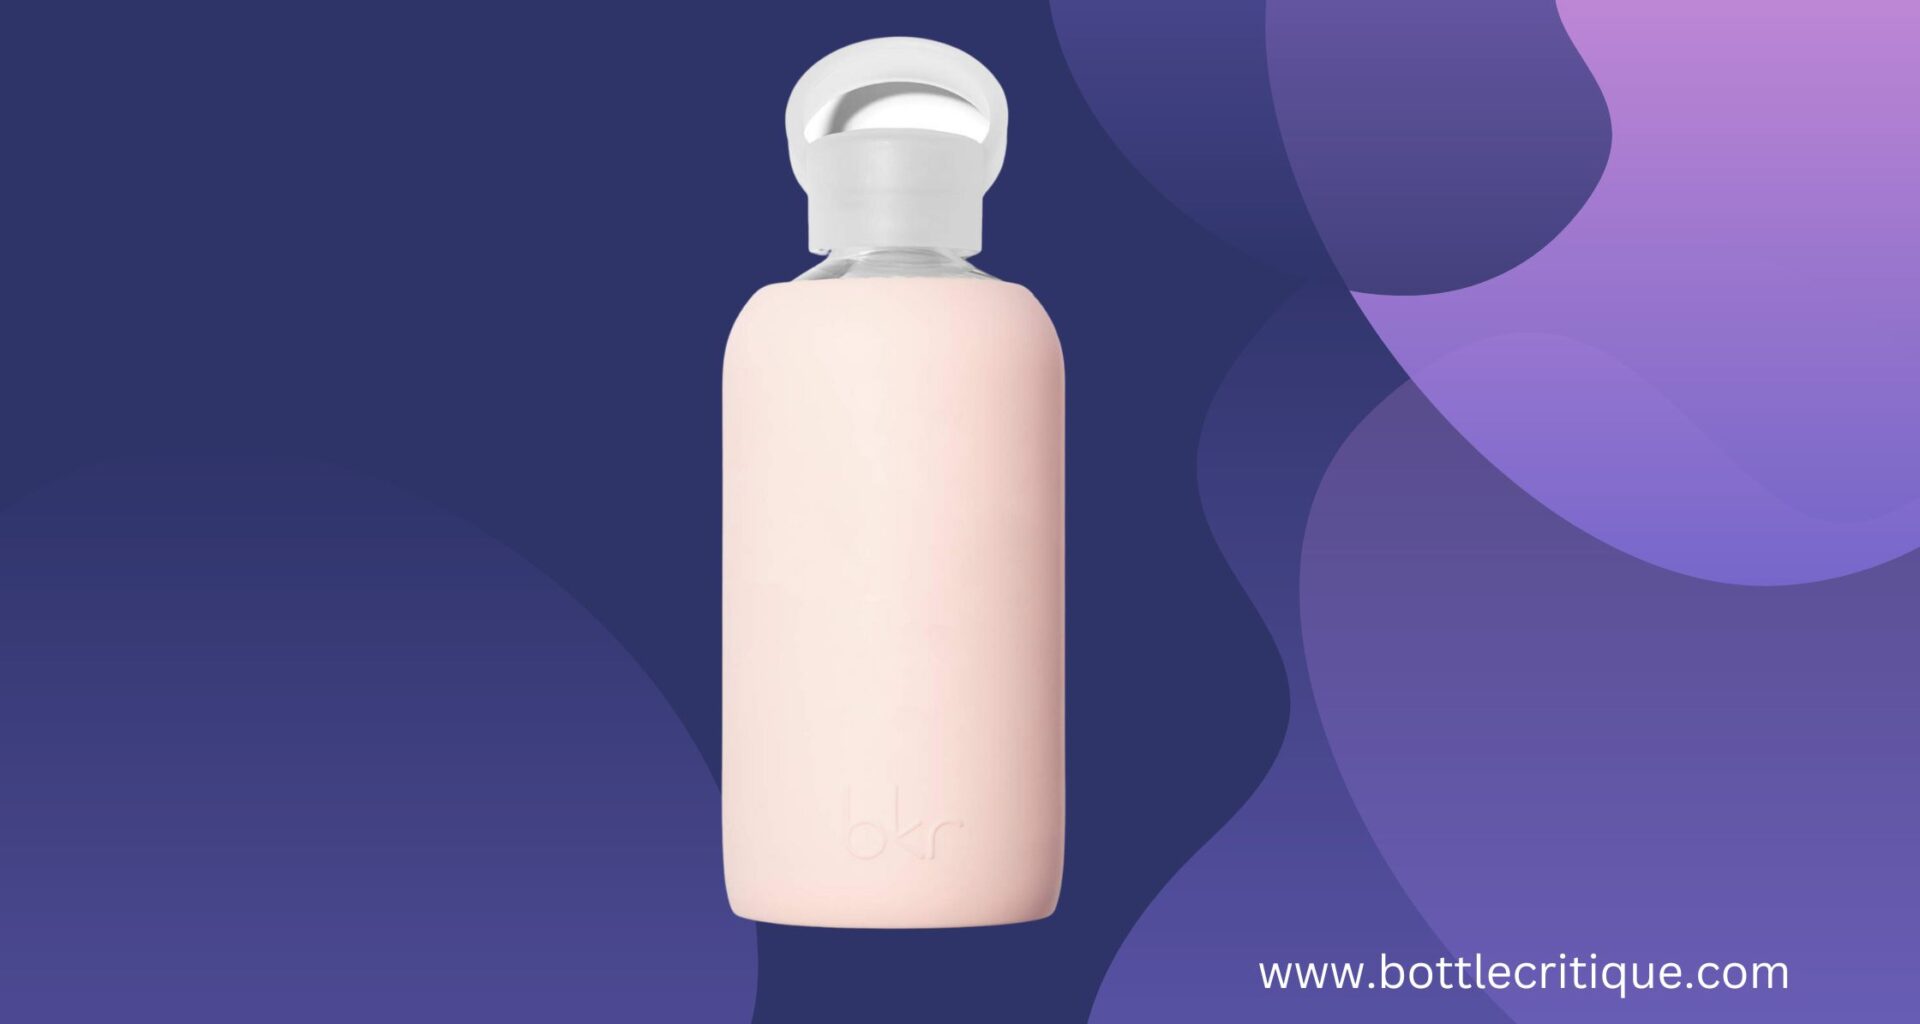 How to Clean Bkr Water Bottle?